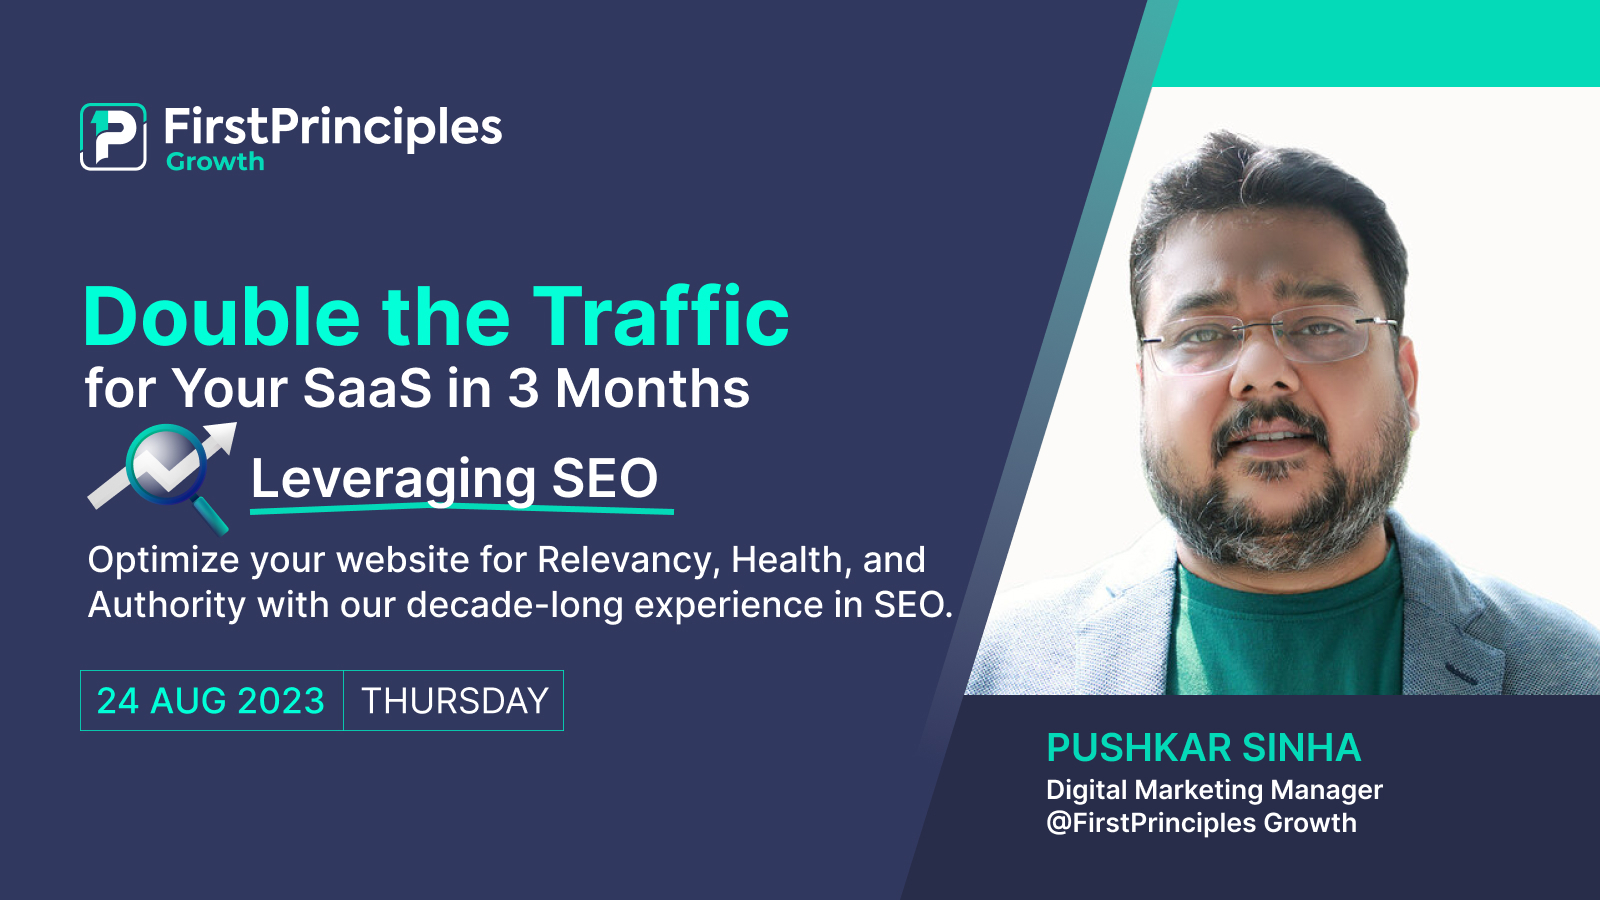 Double the Traffic for Your SaaS in 3 Months by Leveraging SEO